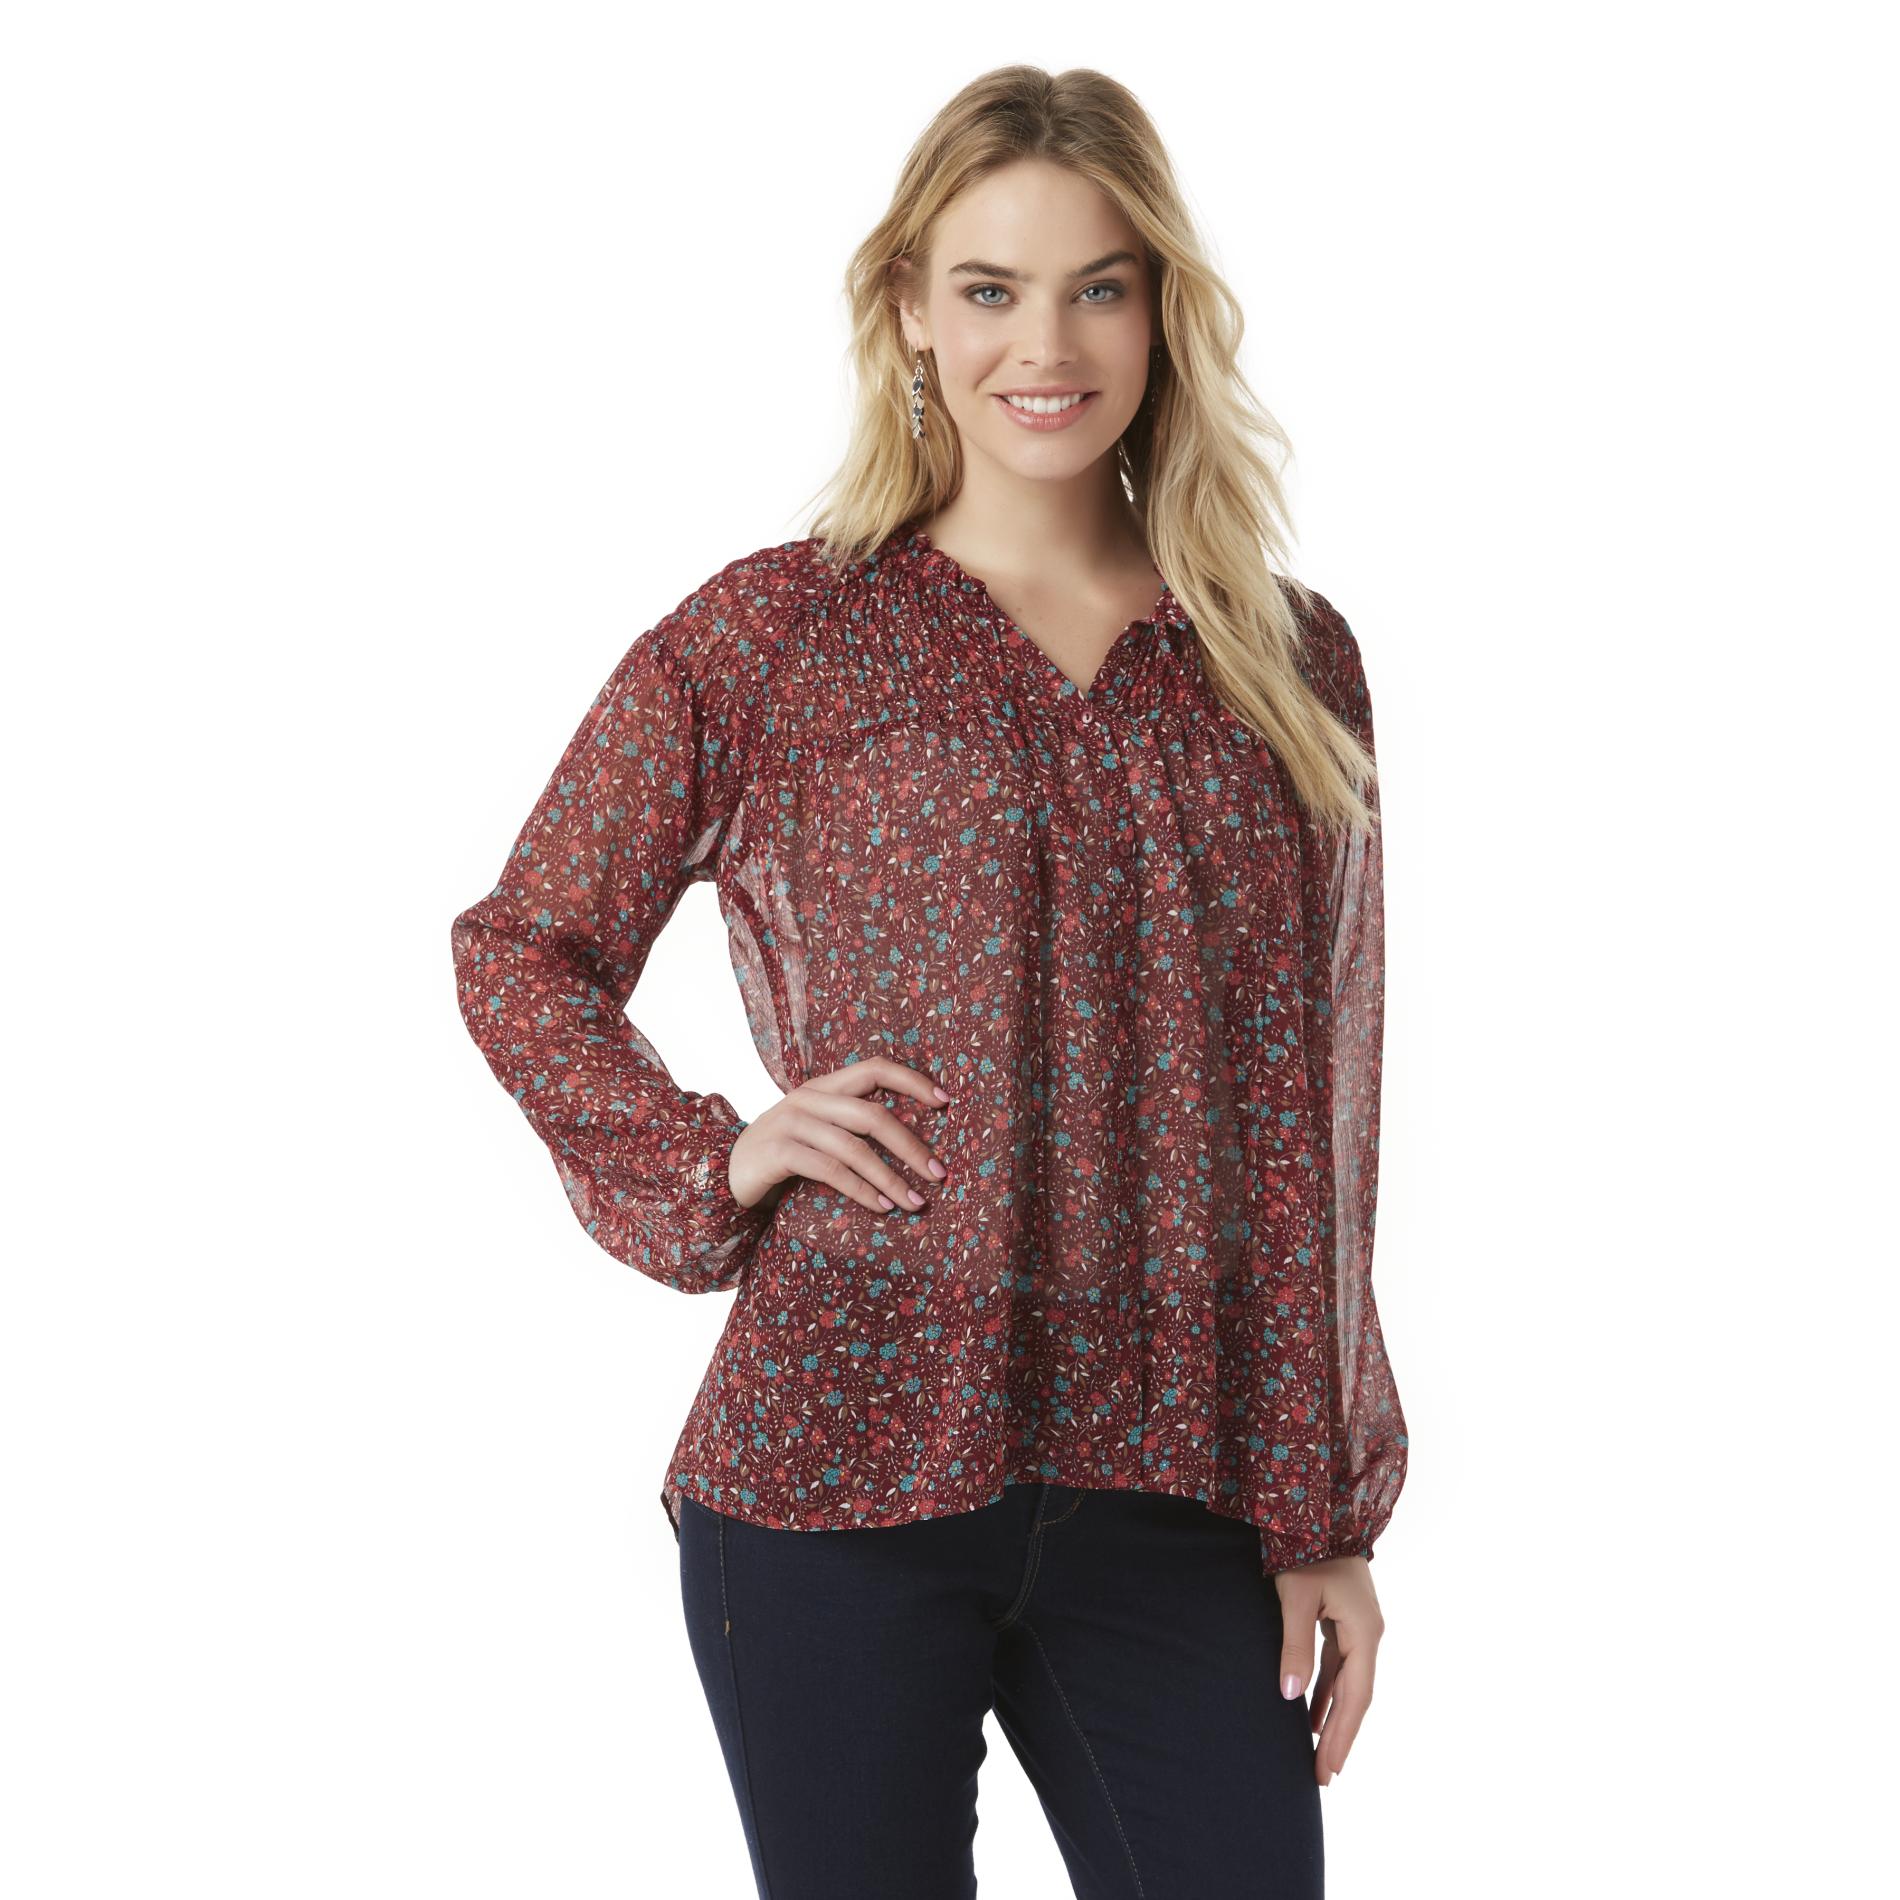 Canyon River Blues Women's Smocked Peasant Top - Floral